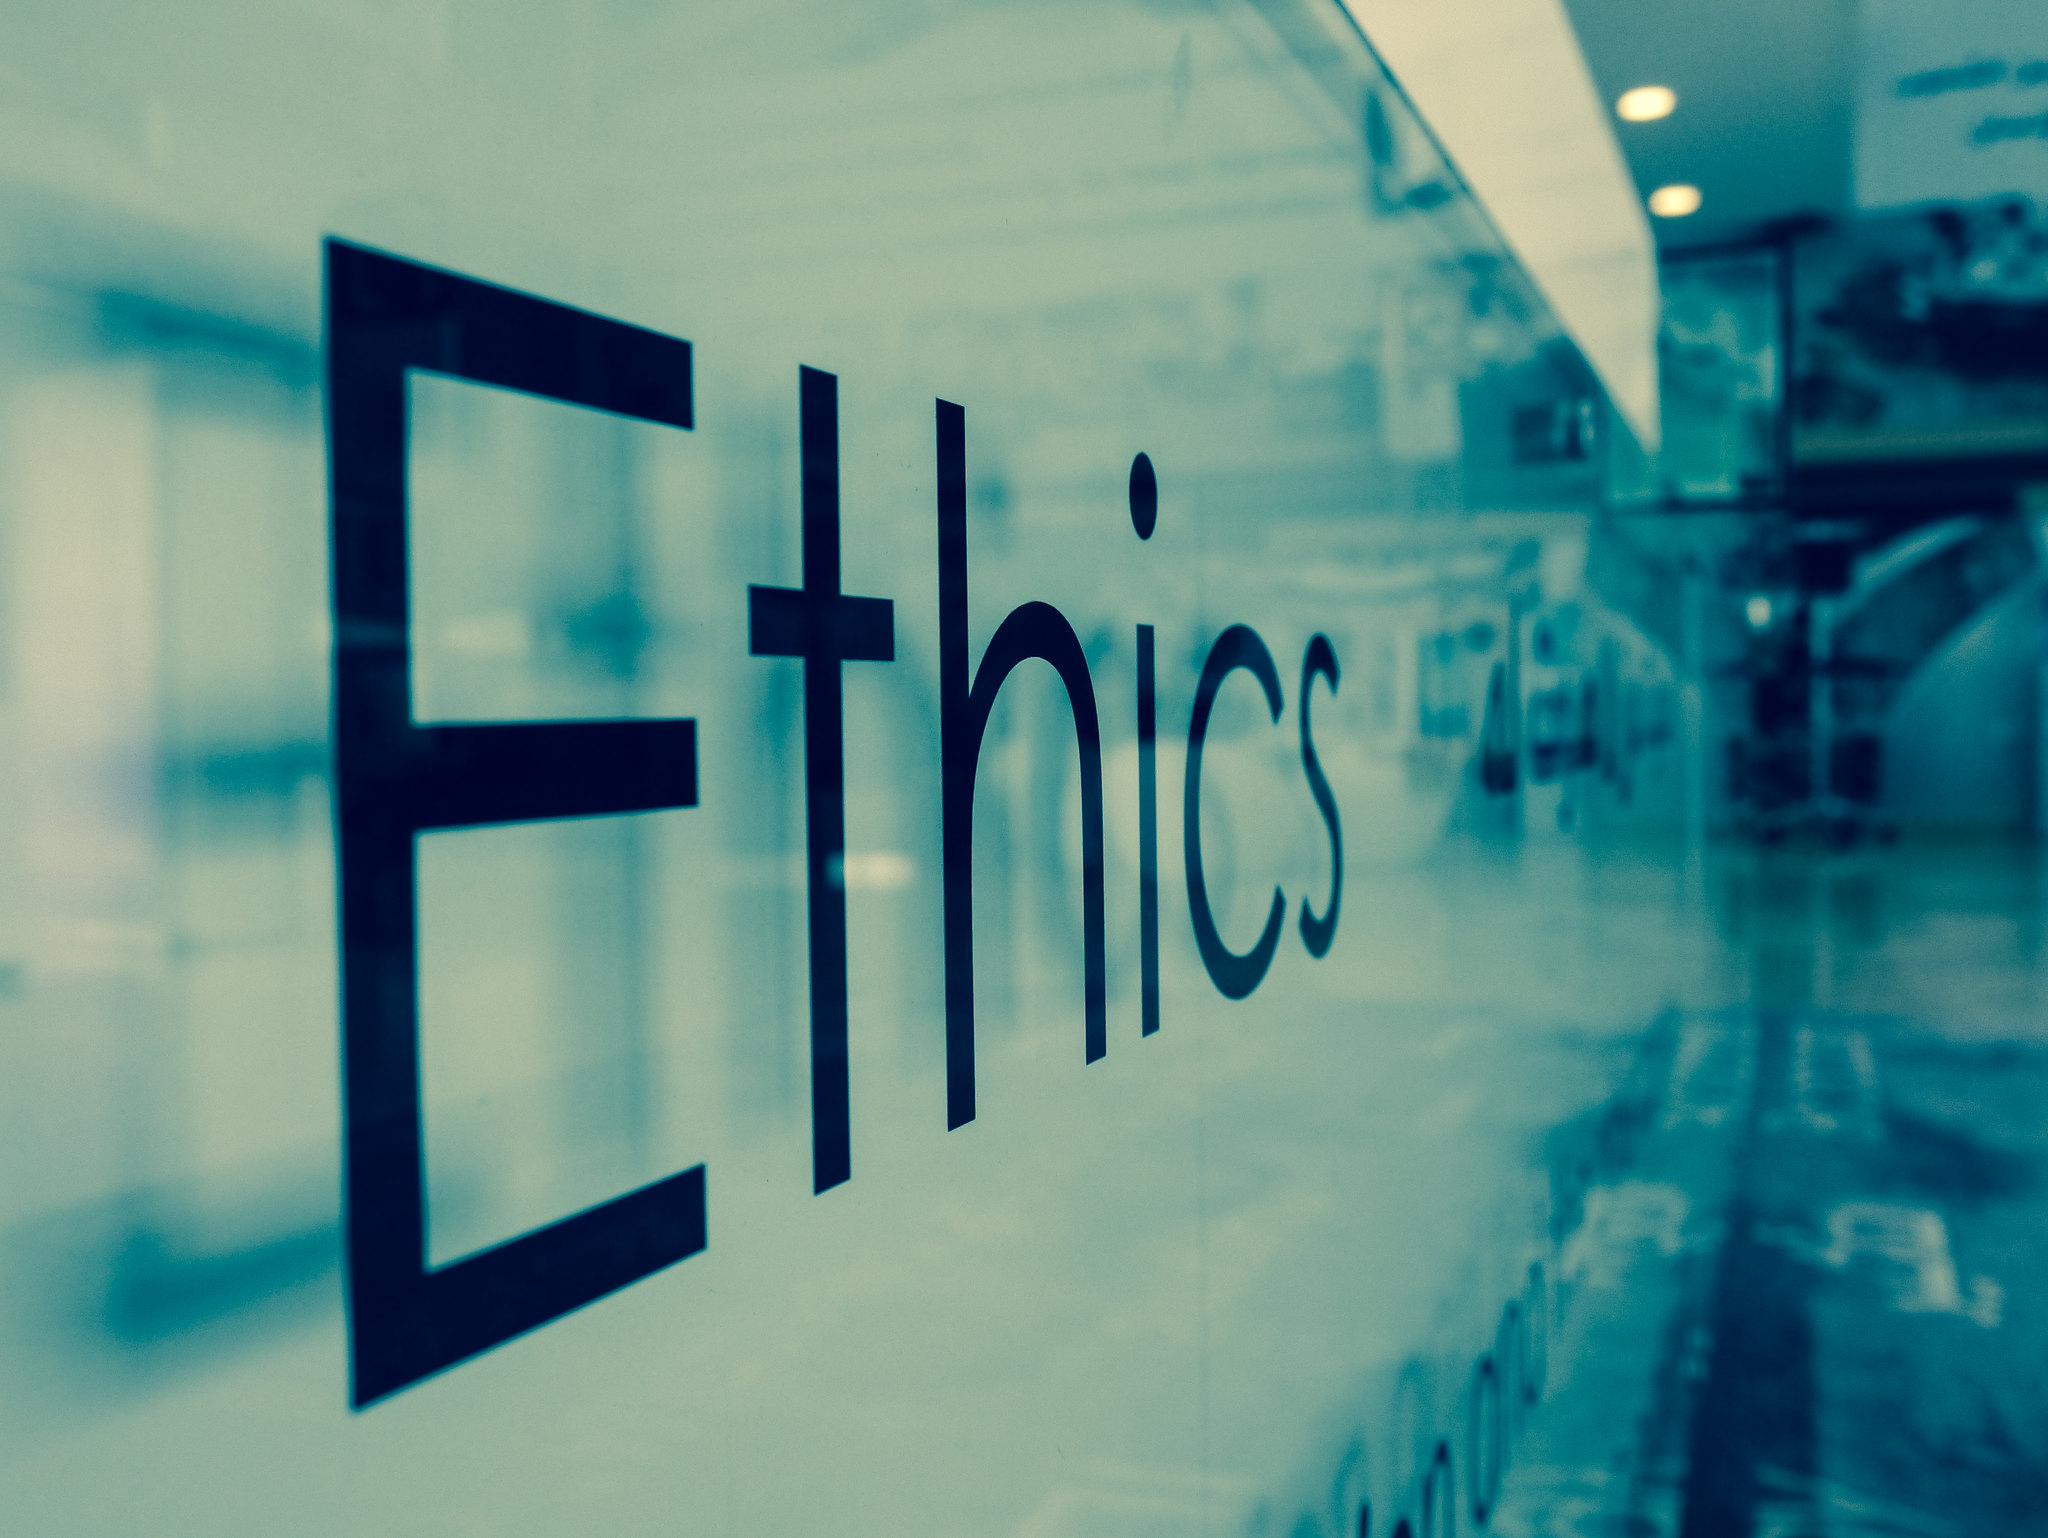 Image of the word "Ethics" written on glass.